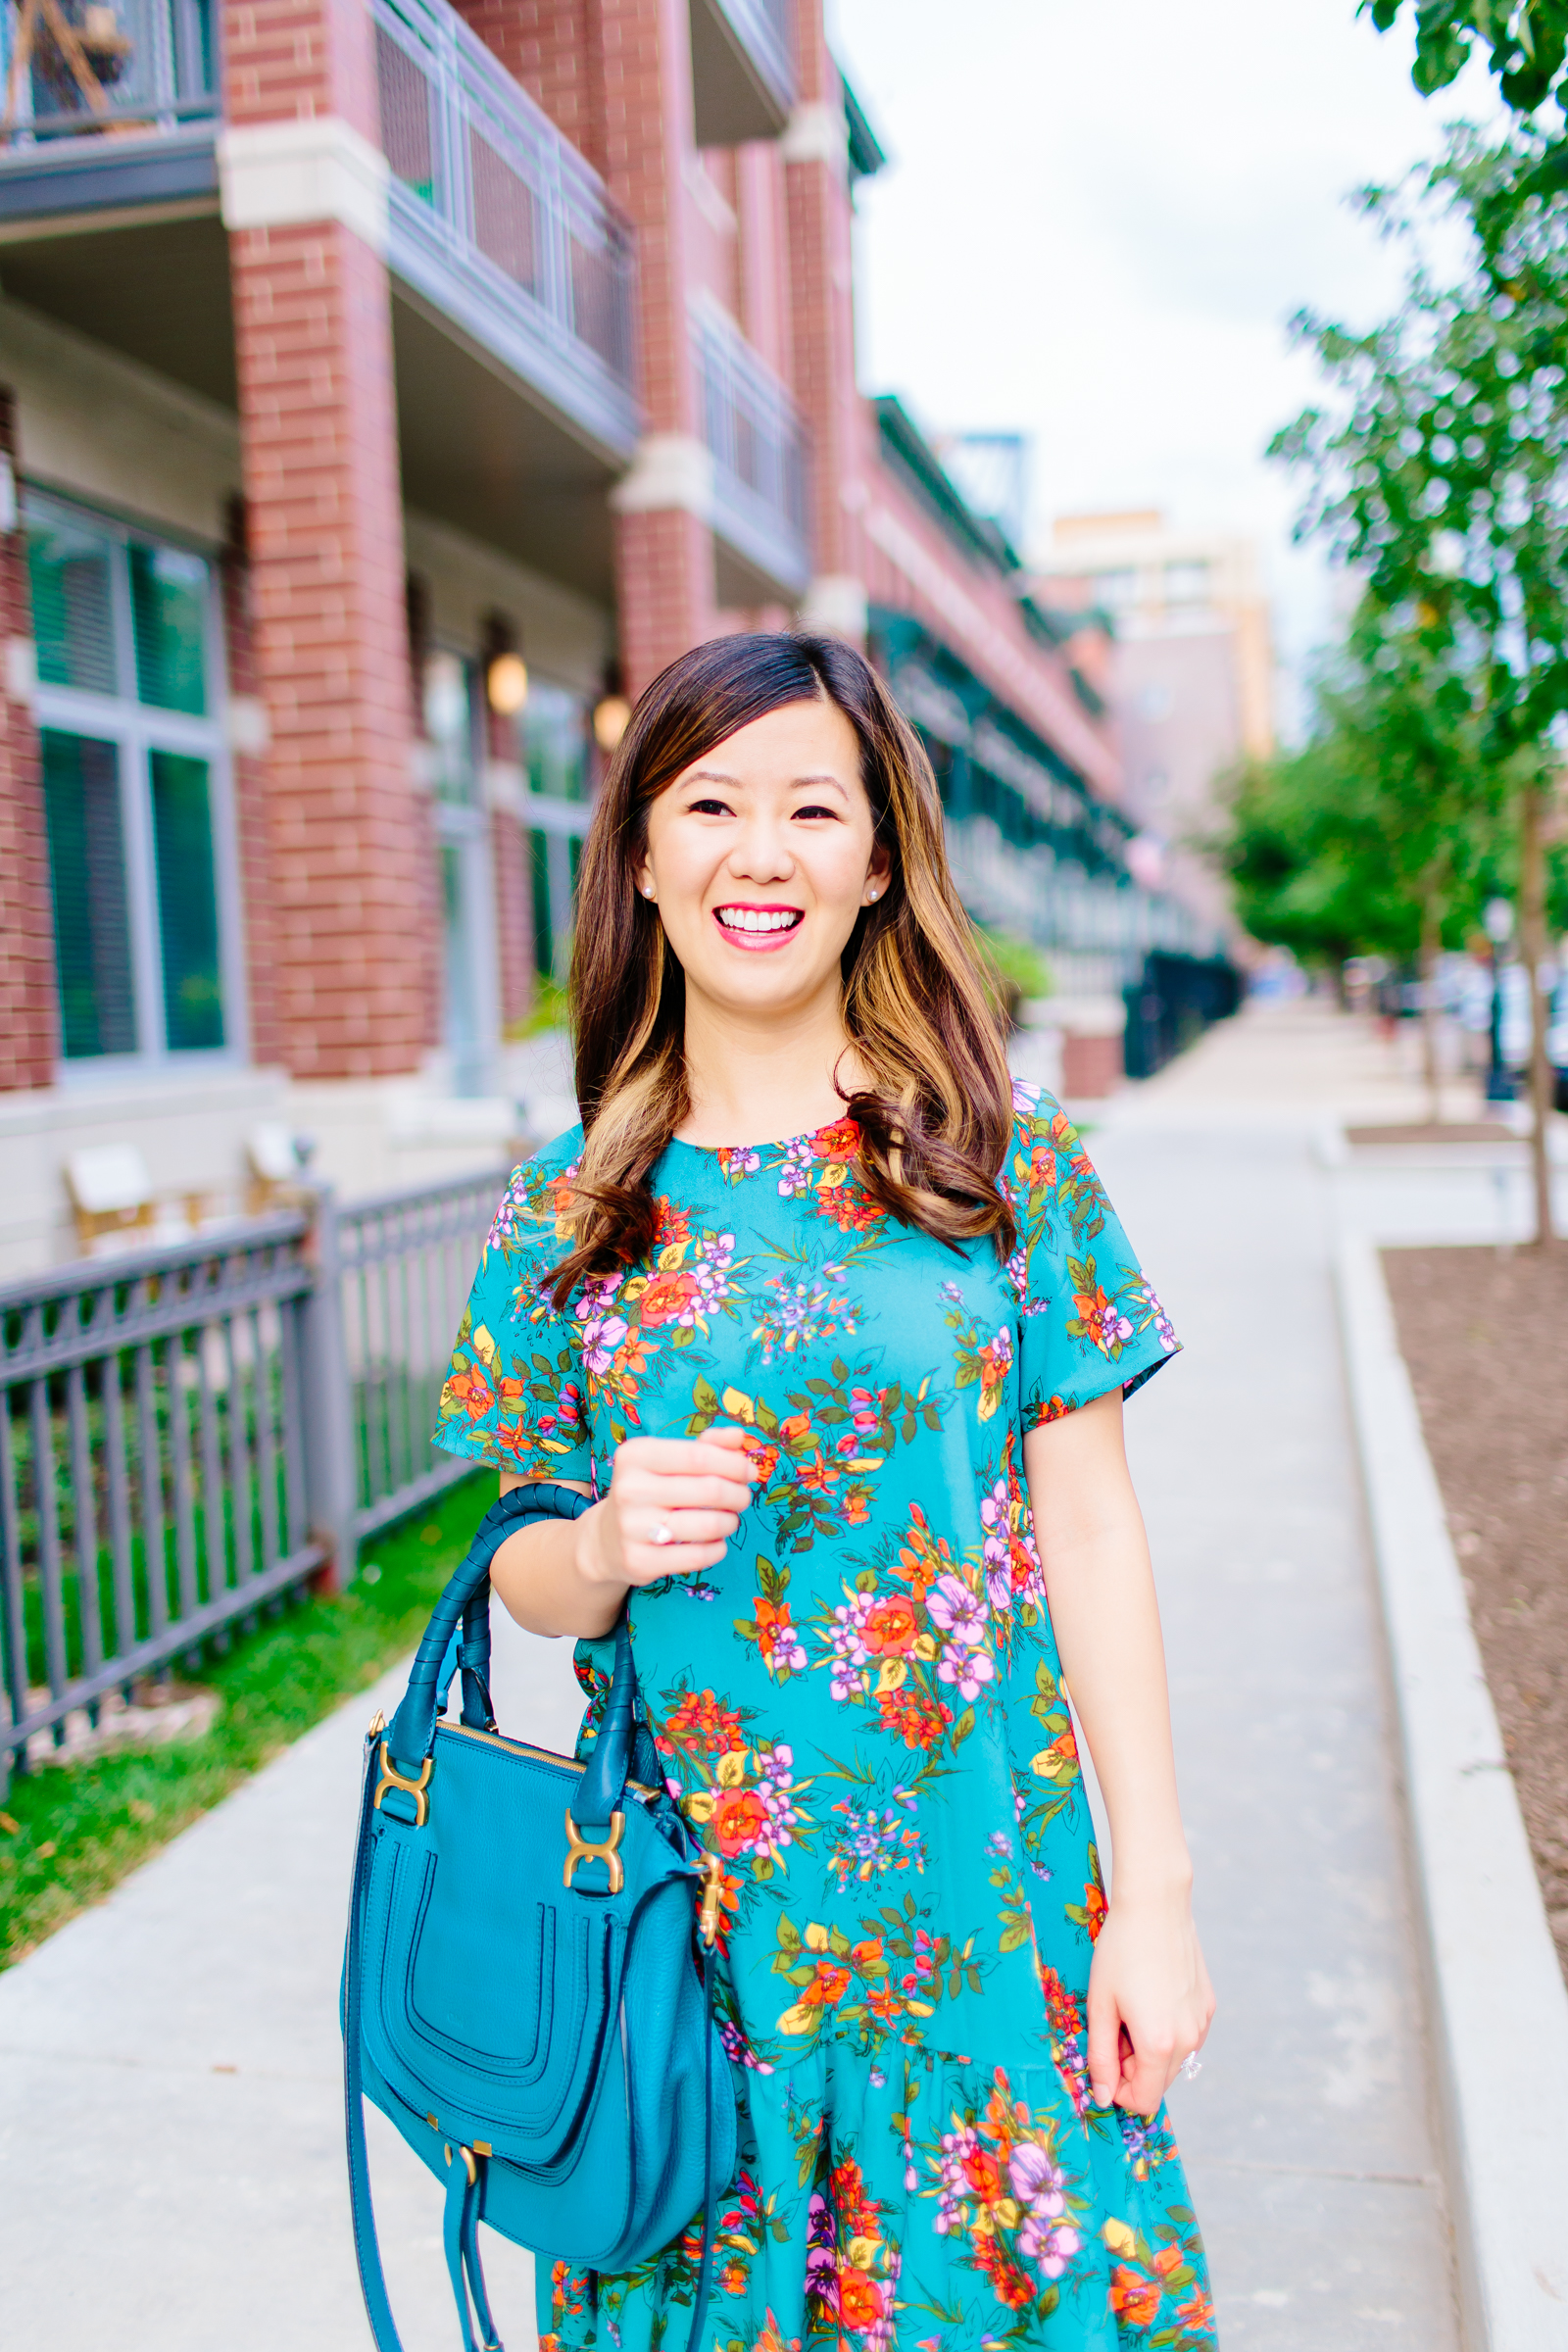 Halogen Floral Short Sleeve Ruffle Hem Dress, Making the Most of the Rest of Summer, Tia Perciballi Fashion & Lifestyle Blog